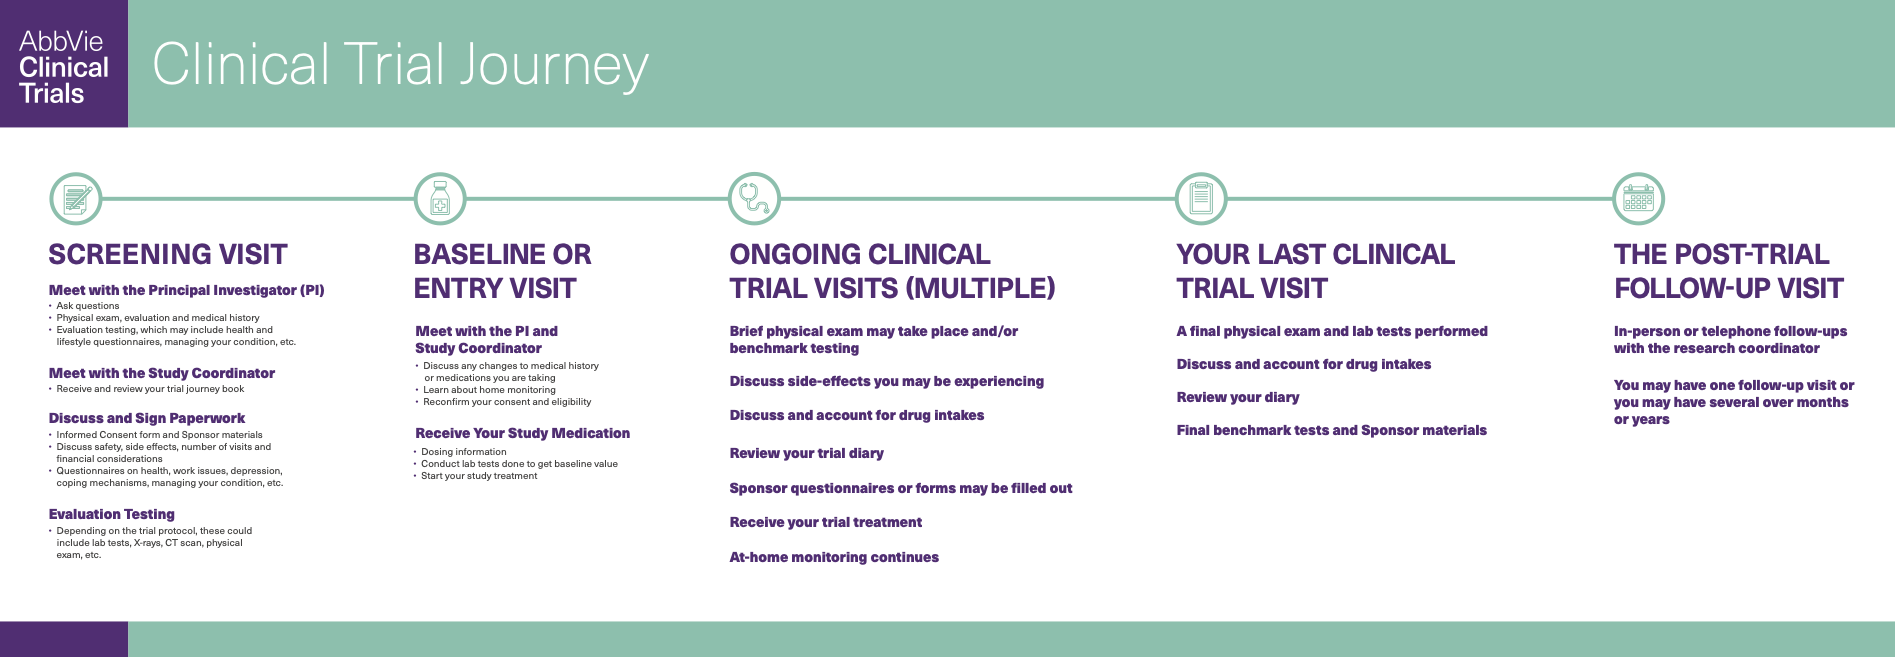 Clinical Trial Journey - Learn More image